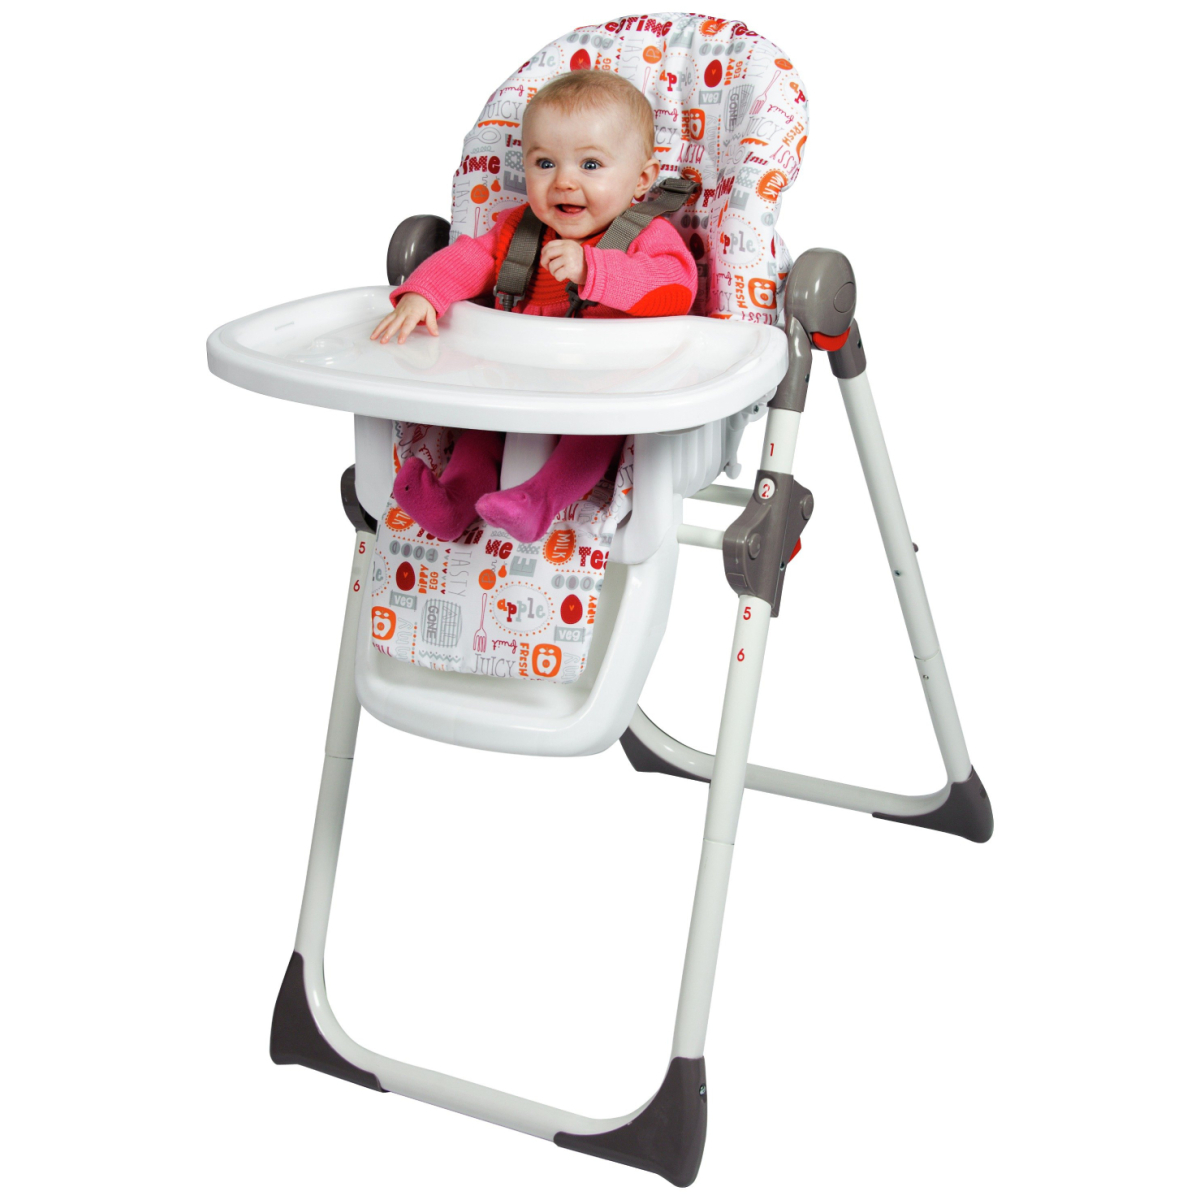 Red Kite Feed Me Deli Highchair